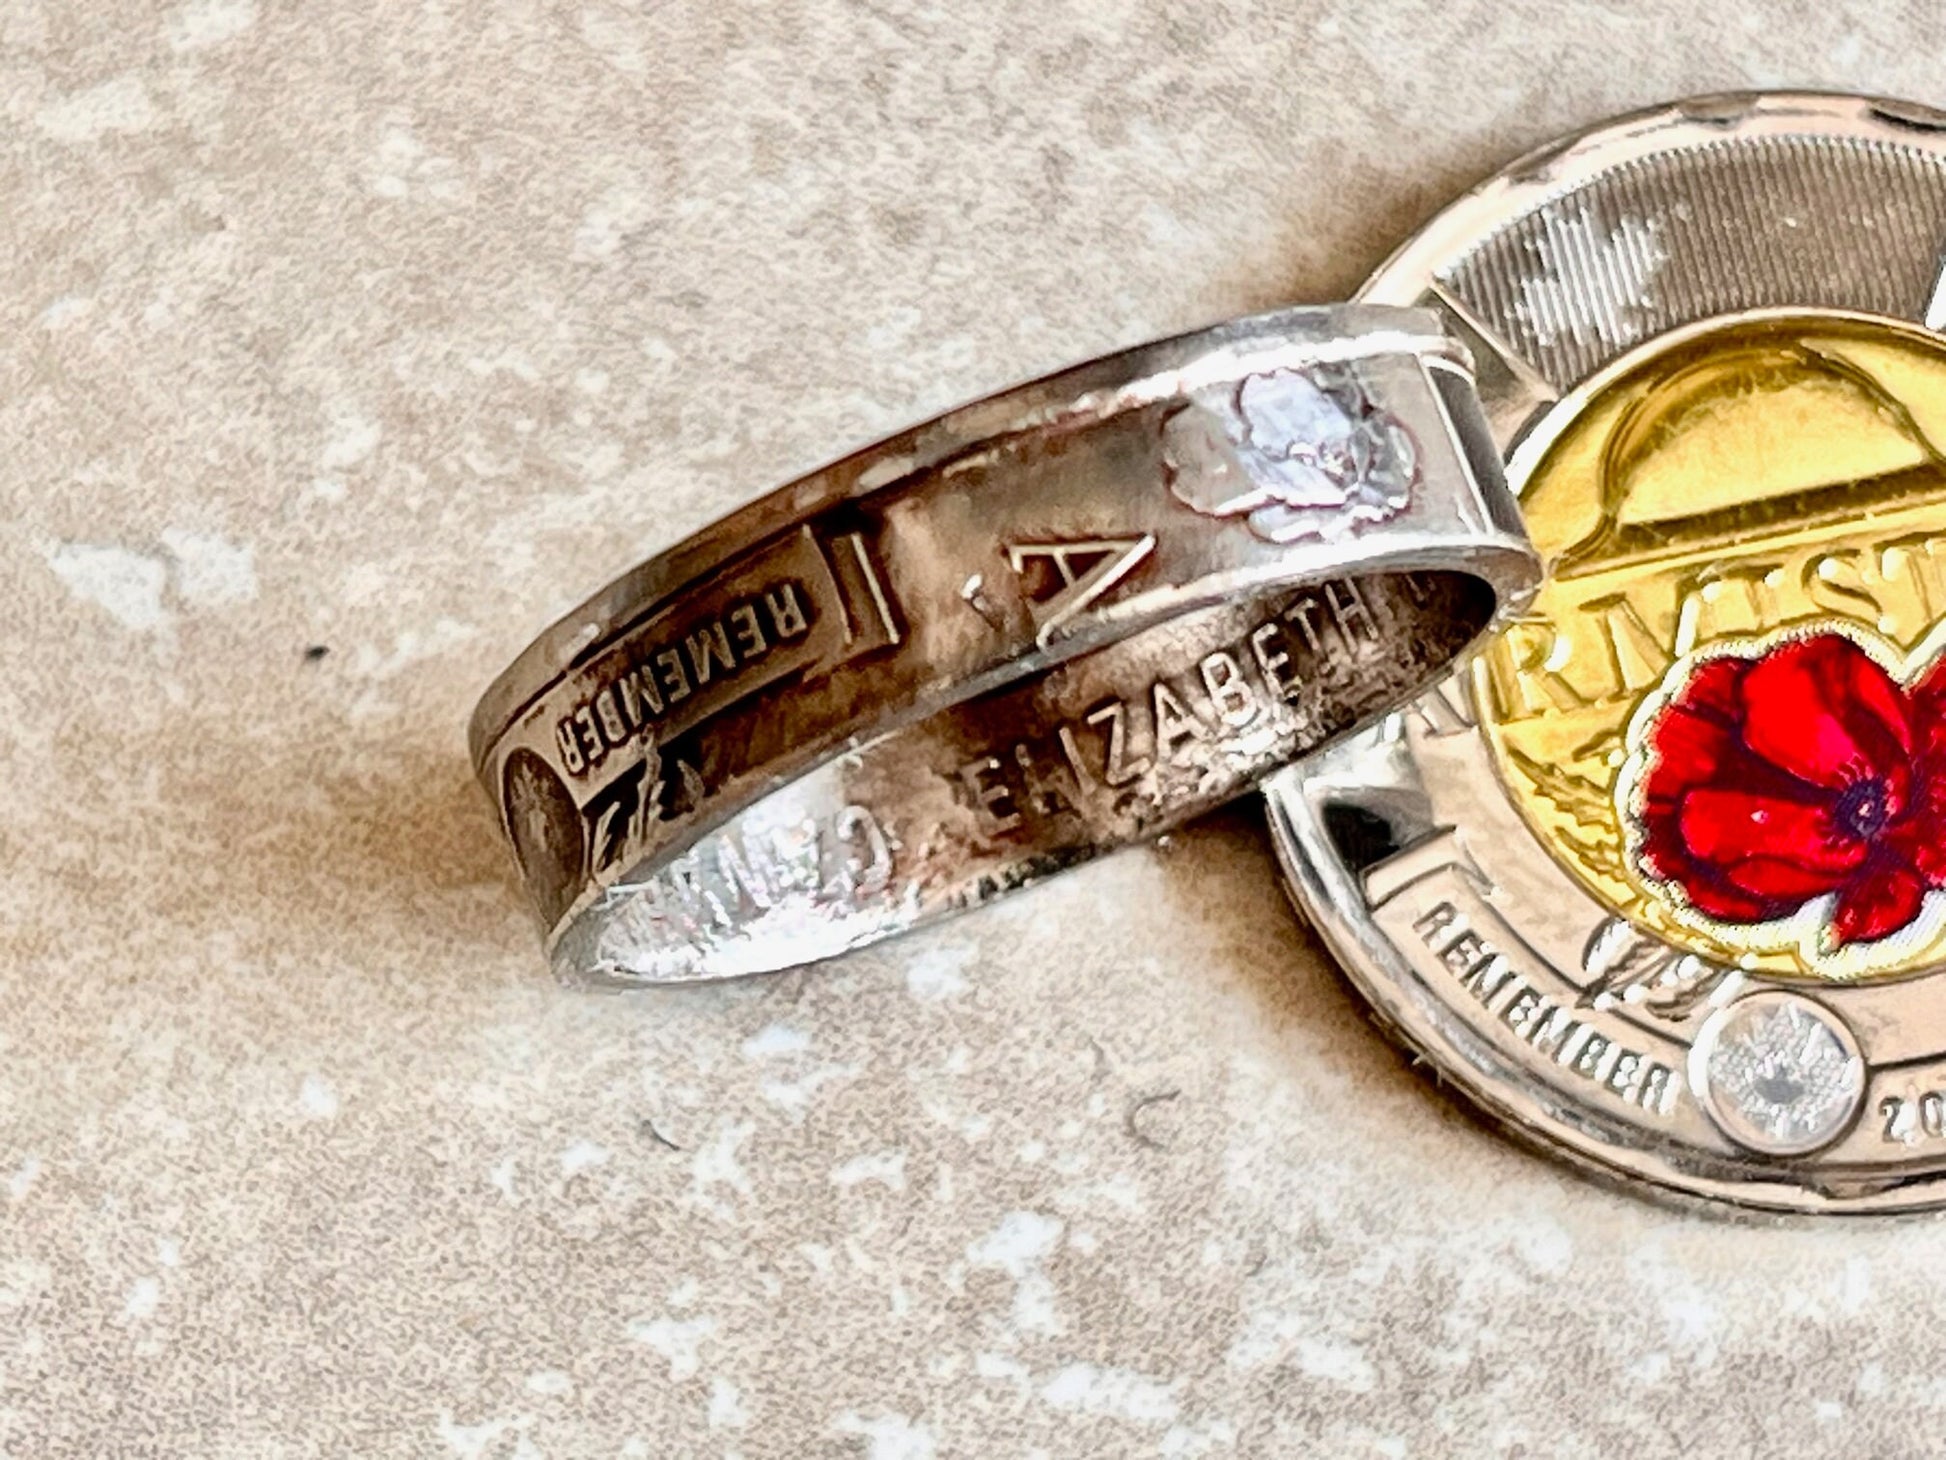 Armistice Canada Coin Ring World War One Handmade Personal Jewelry Ring Gift For Friend Coin Ring Gift For Him Her World Coin Collector